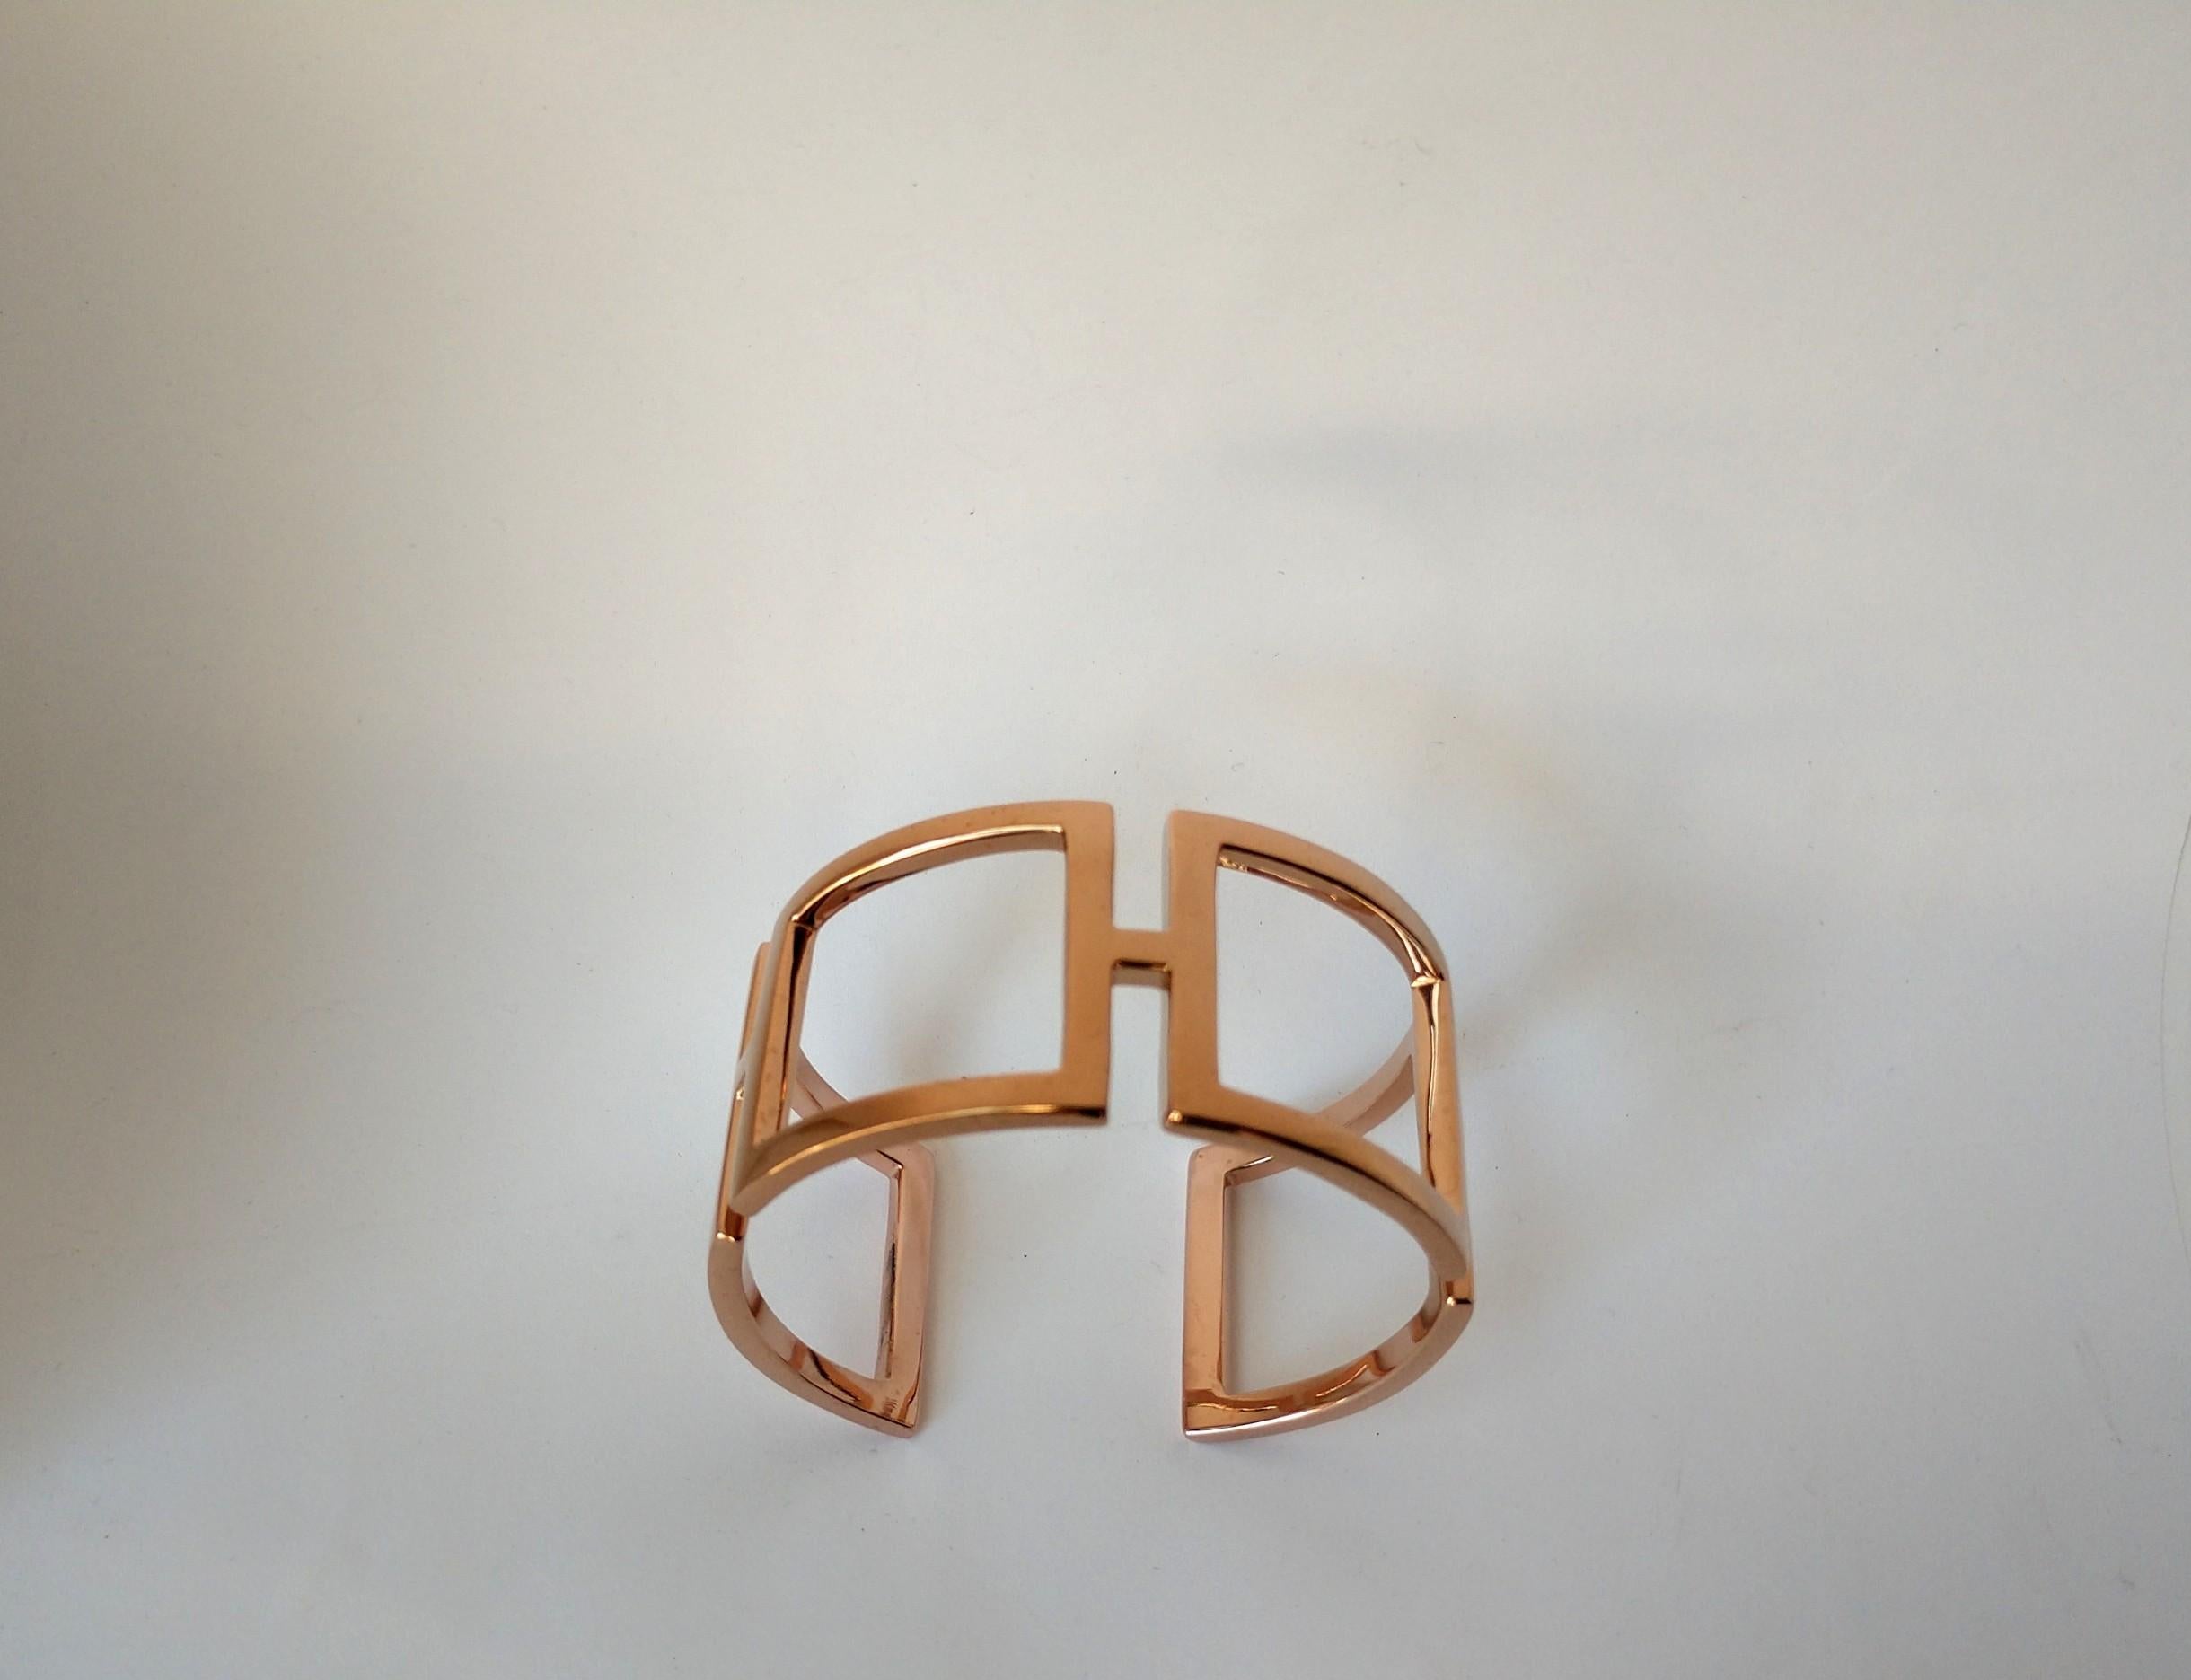 18 Karat Pink Gold Vermeil Rectangle Cuff Bracelet , 3 x 1.5 mm thick x  mm 1 3/16ths inch  wide. This is one of my early designs.  I was using the simple rectangle in a curved state for the ultimate in expression of sculpture and a piece of